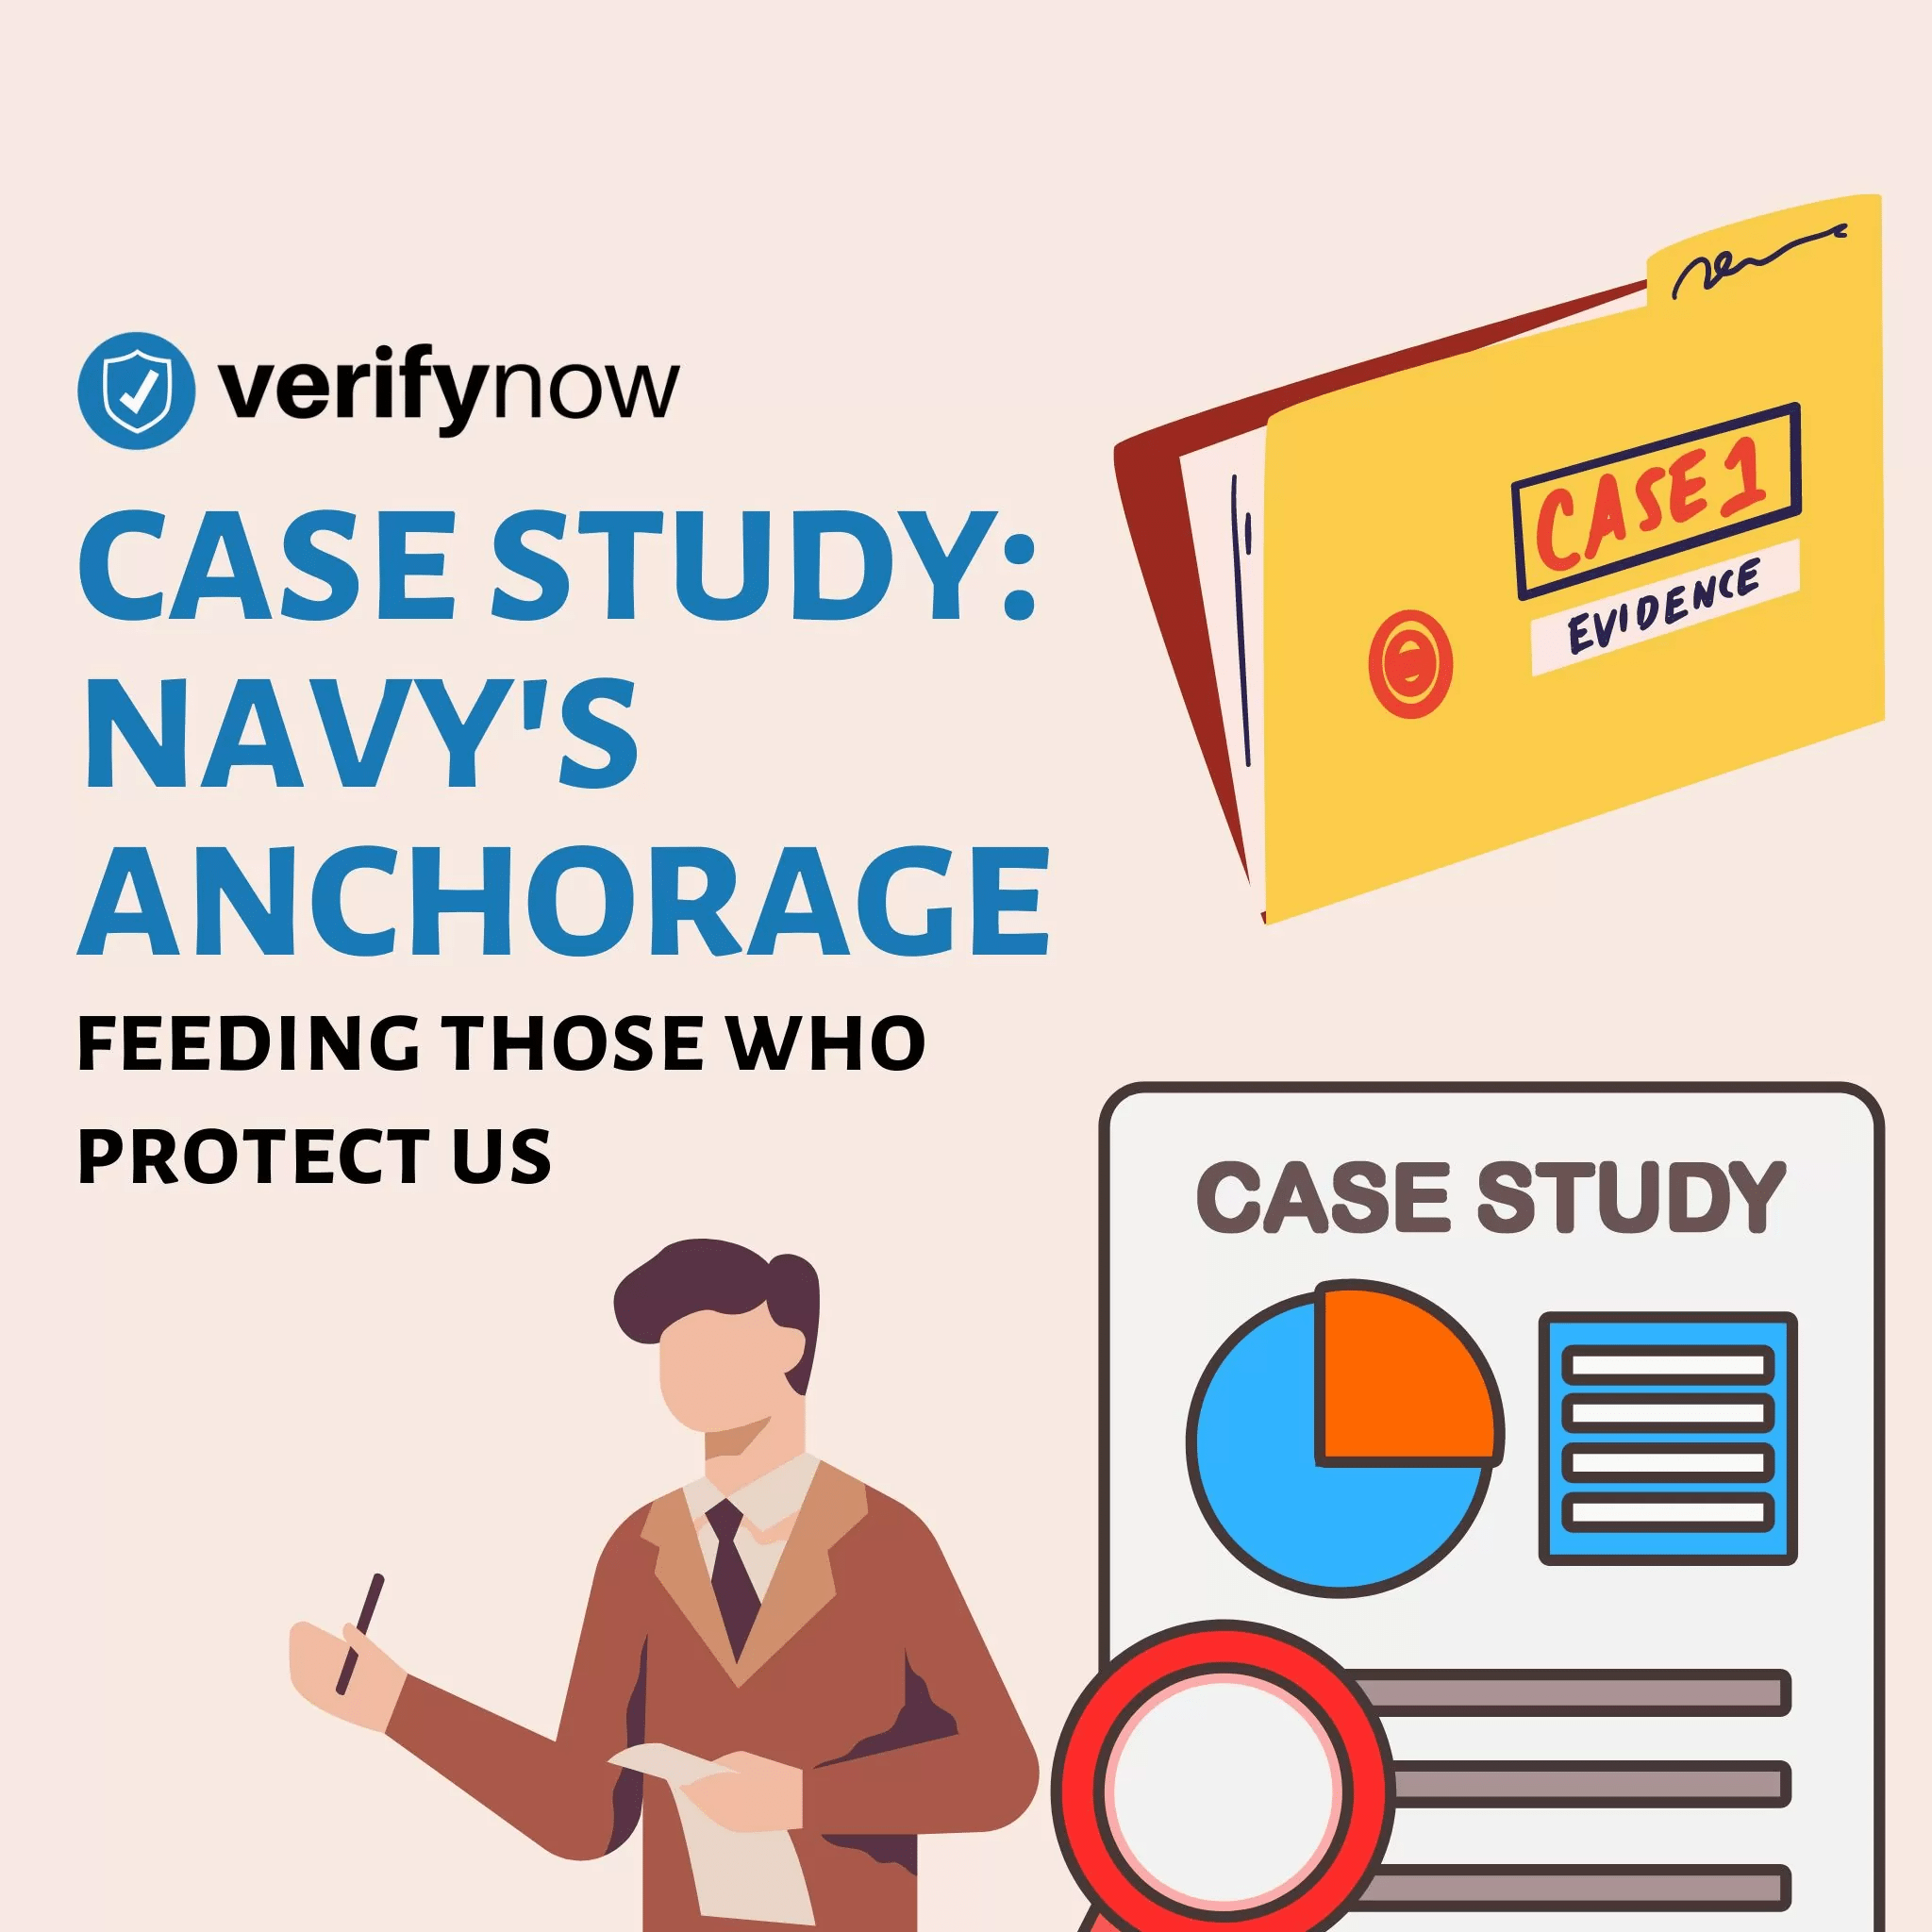 Featured Image - Case Study: Feeding Those Who Protect Us with Navy’s Anchorage